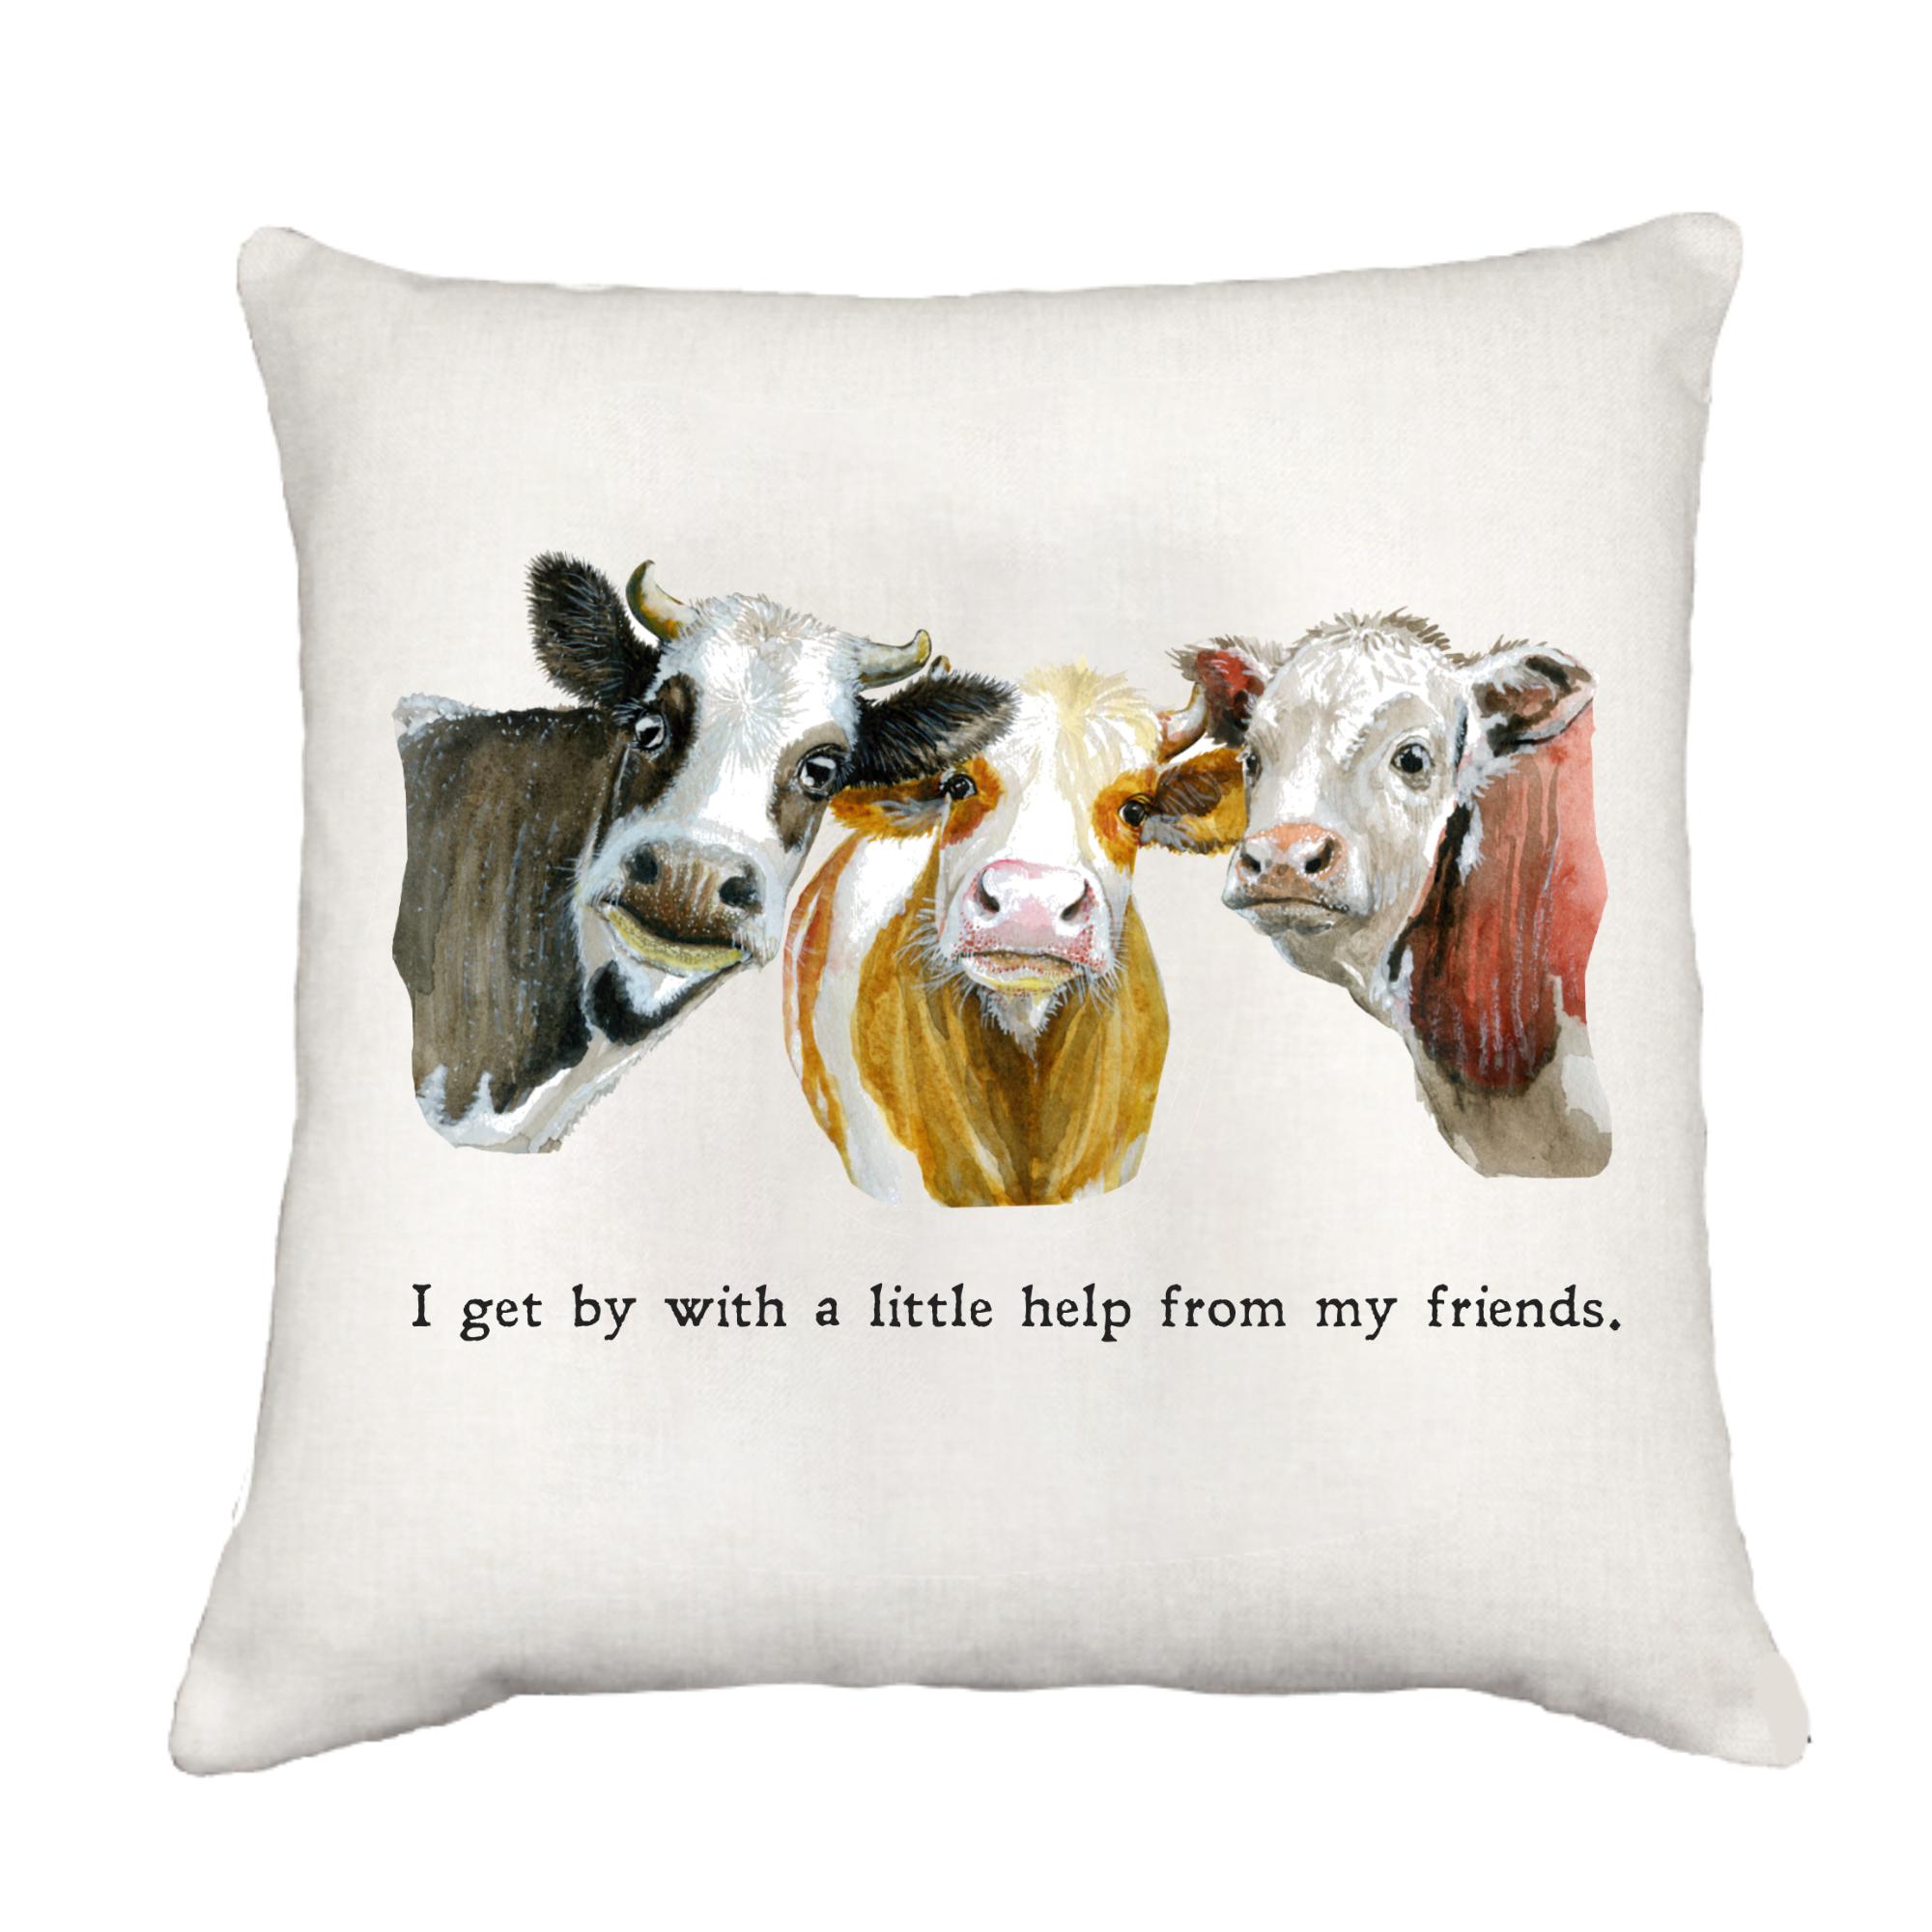 Cow Friends Cottage Pillow Throw/Decorative Pillow - Southern Sisters